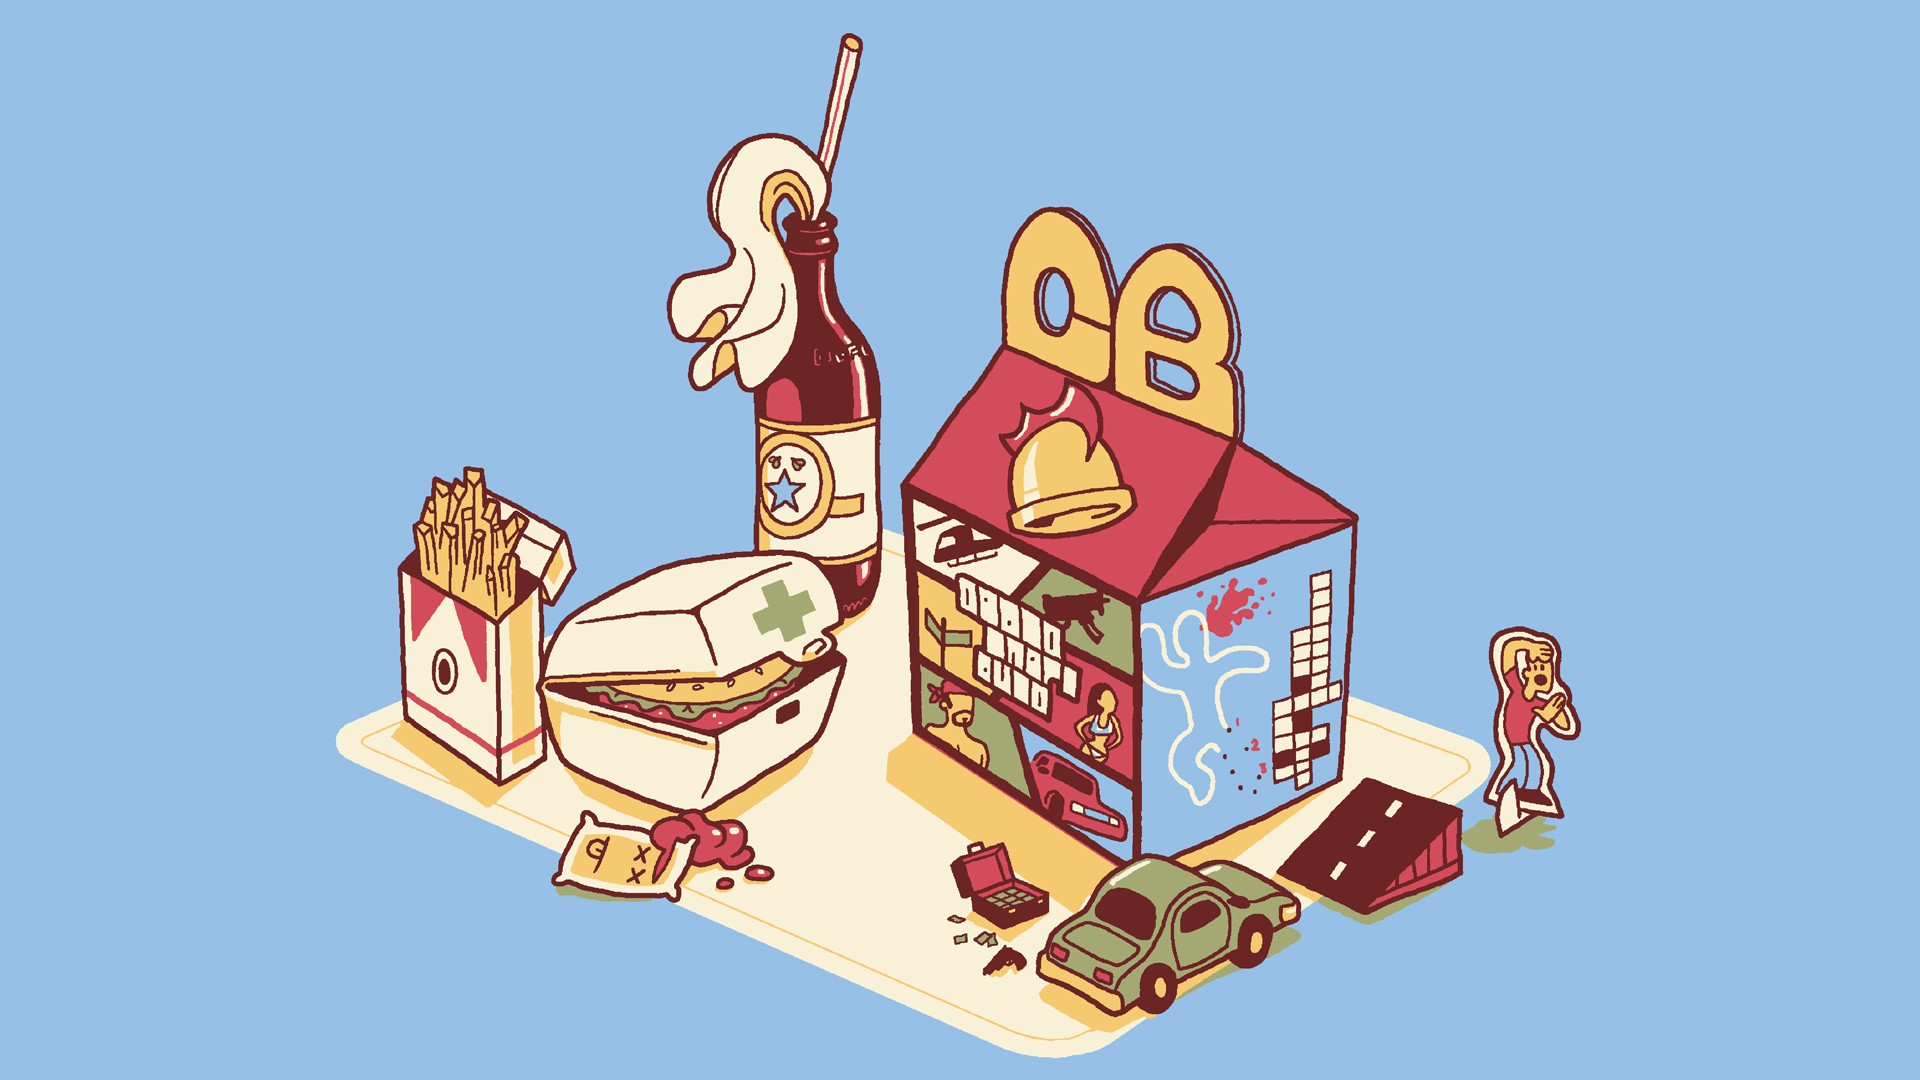 Happy Meal,Grand Theft Auto by Happy Meal,Grand Theft Auto,GTA